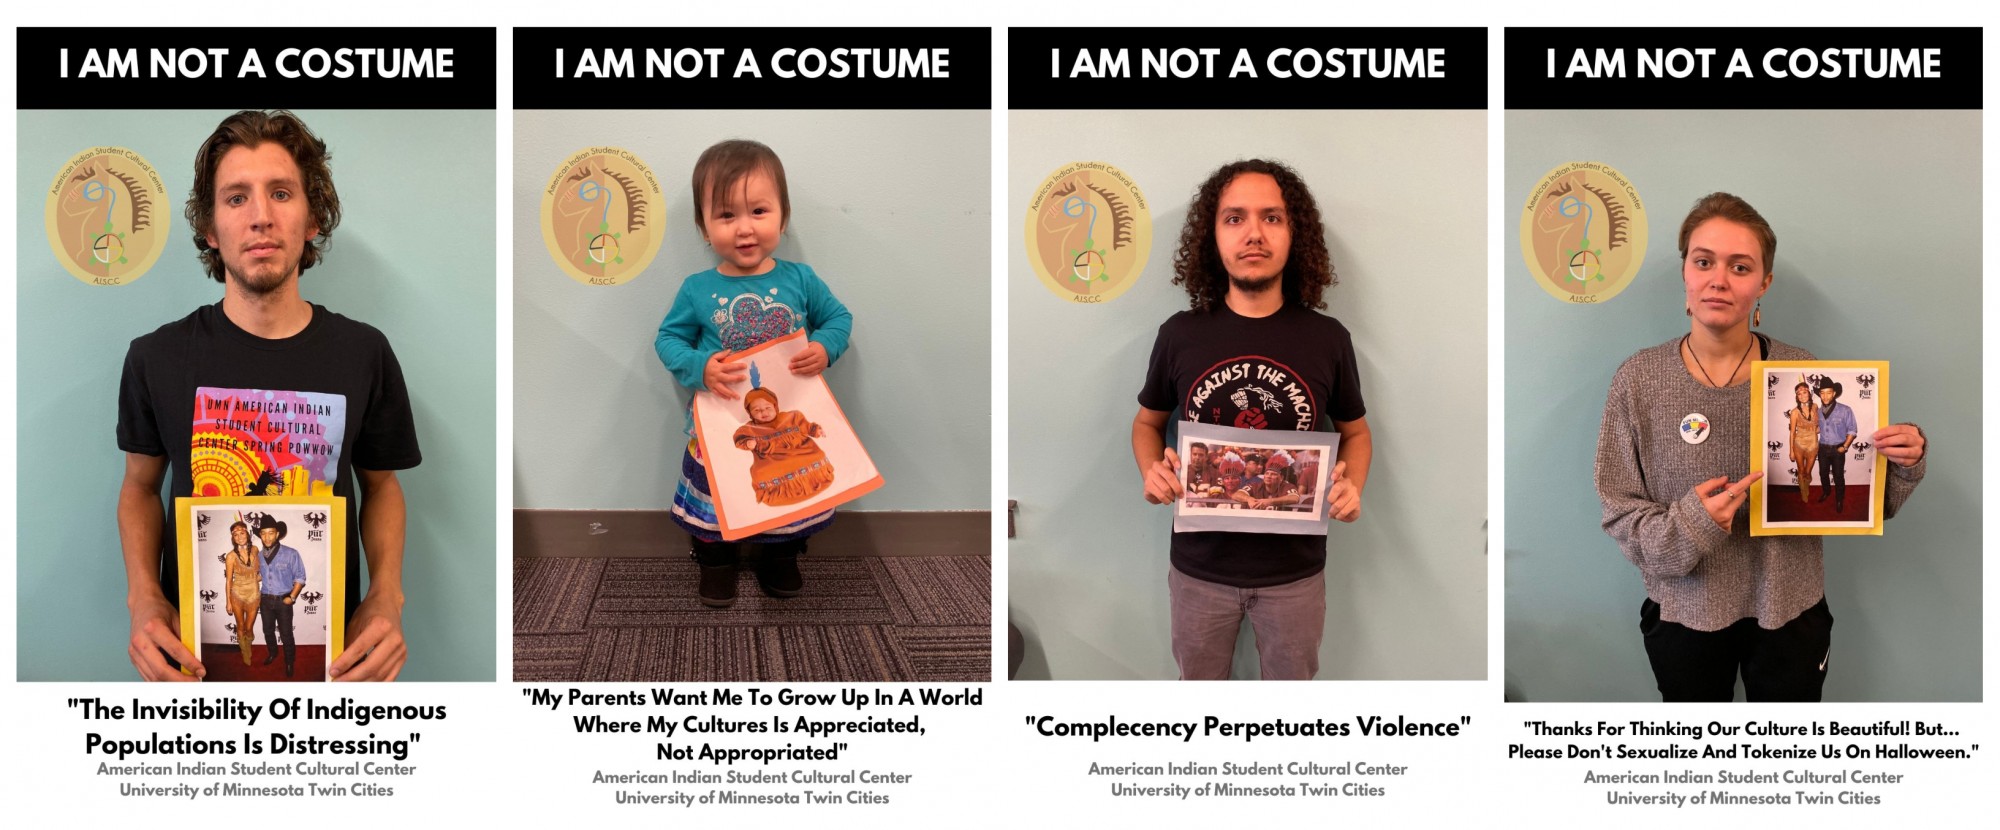 American Indian student group campaign addresses culture appropriation during Halloween – The Minnesota Daily